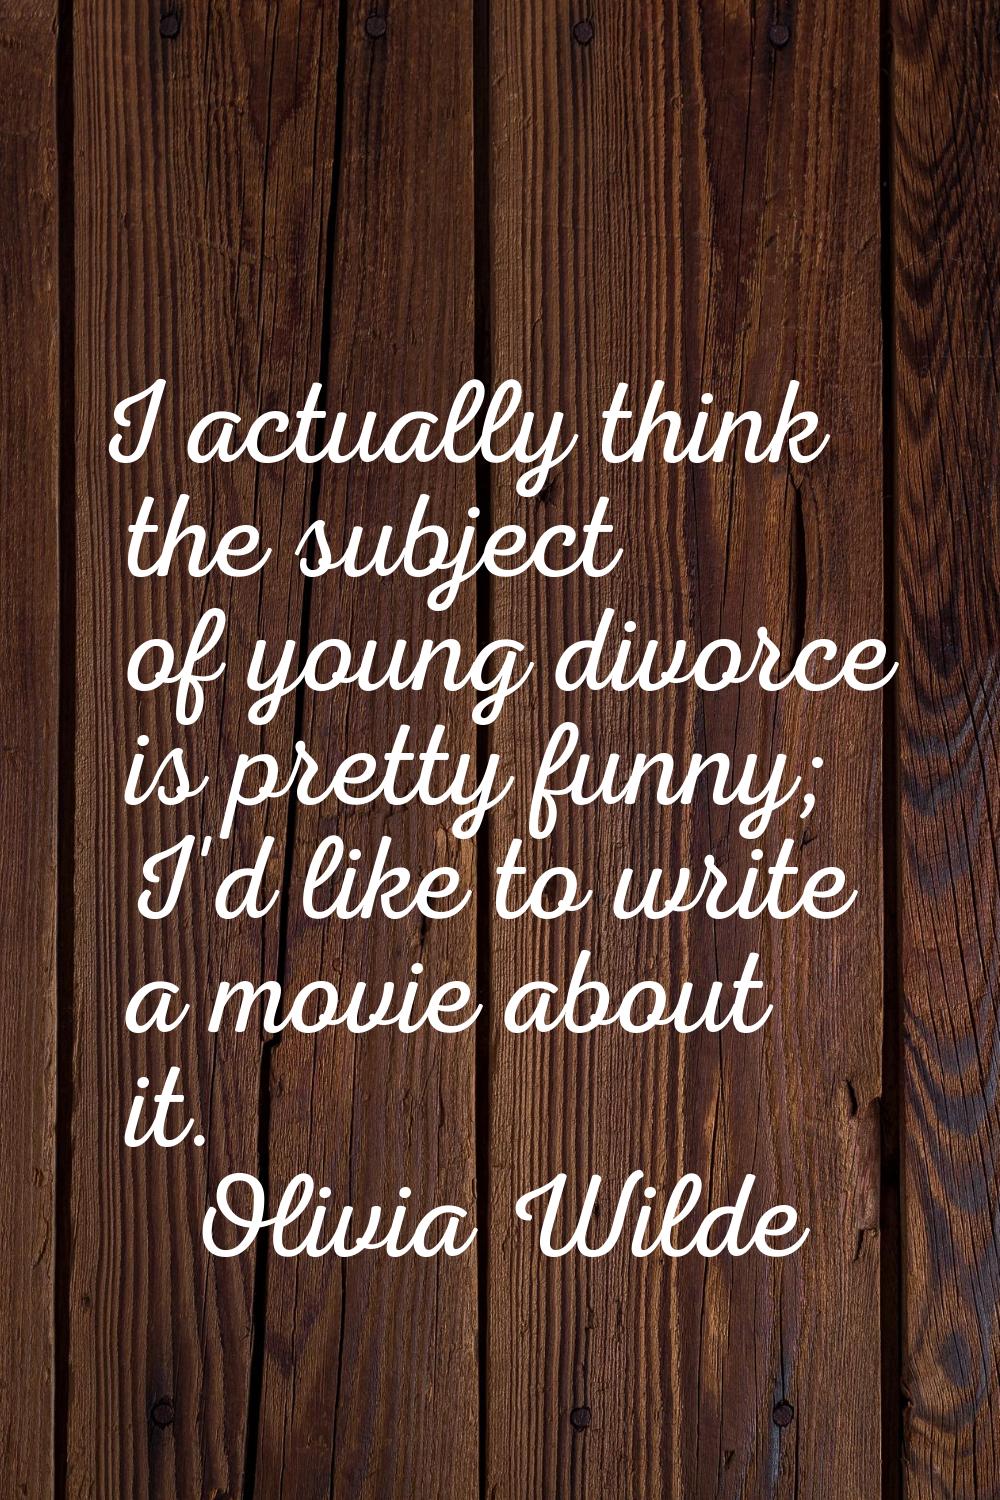 I actually think the subject of young divorce is pretty funny; I'd like to write a movie about it.